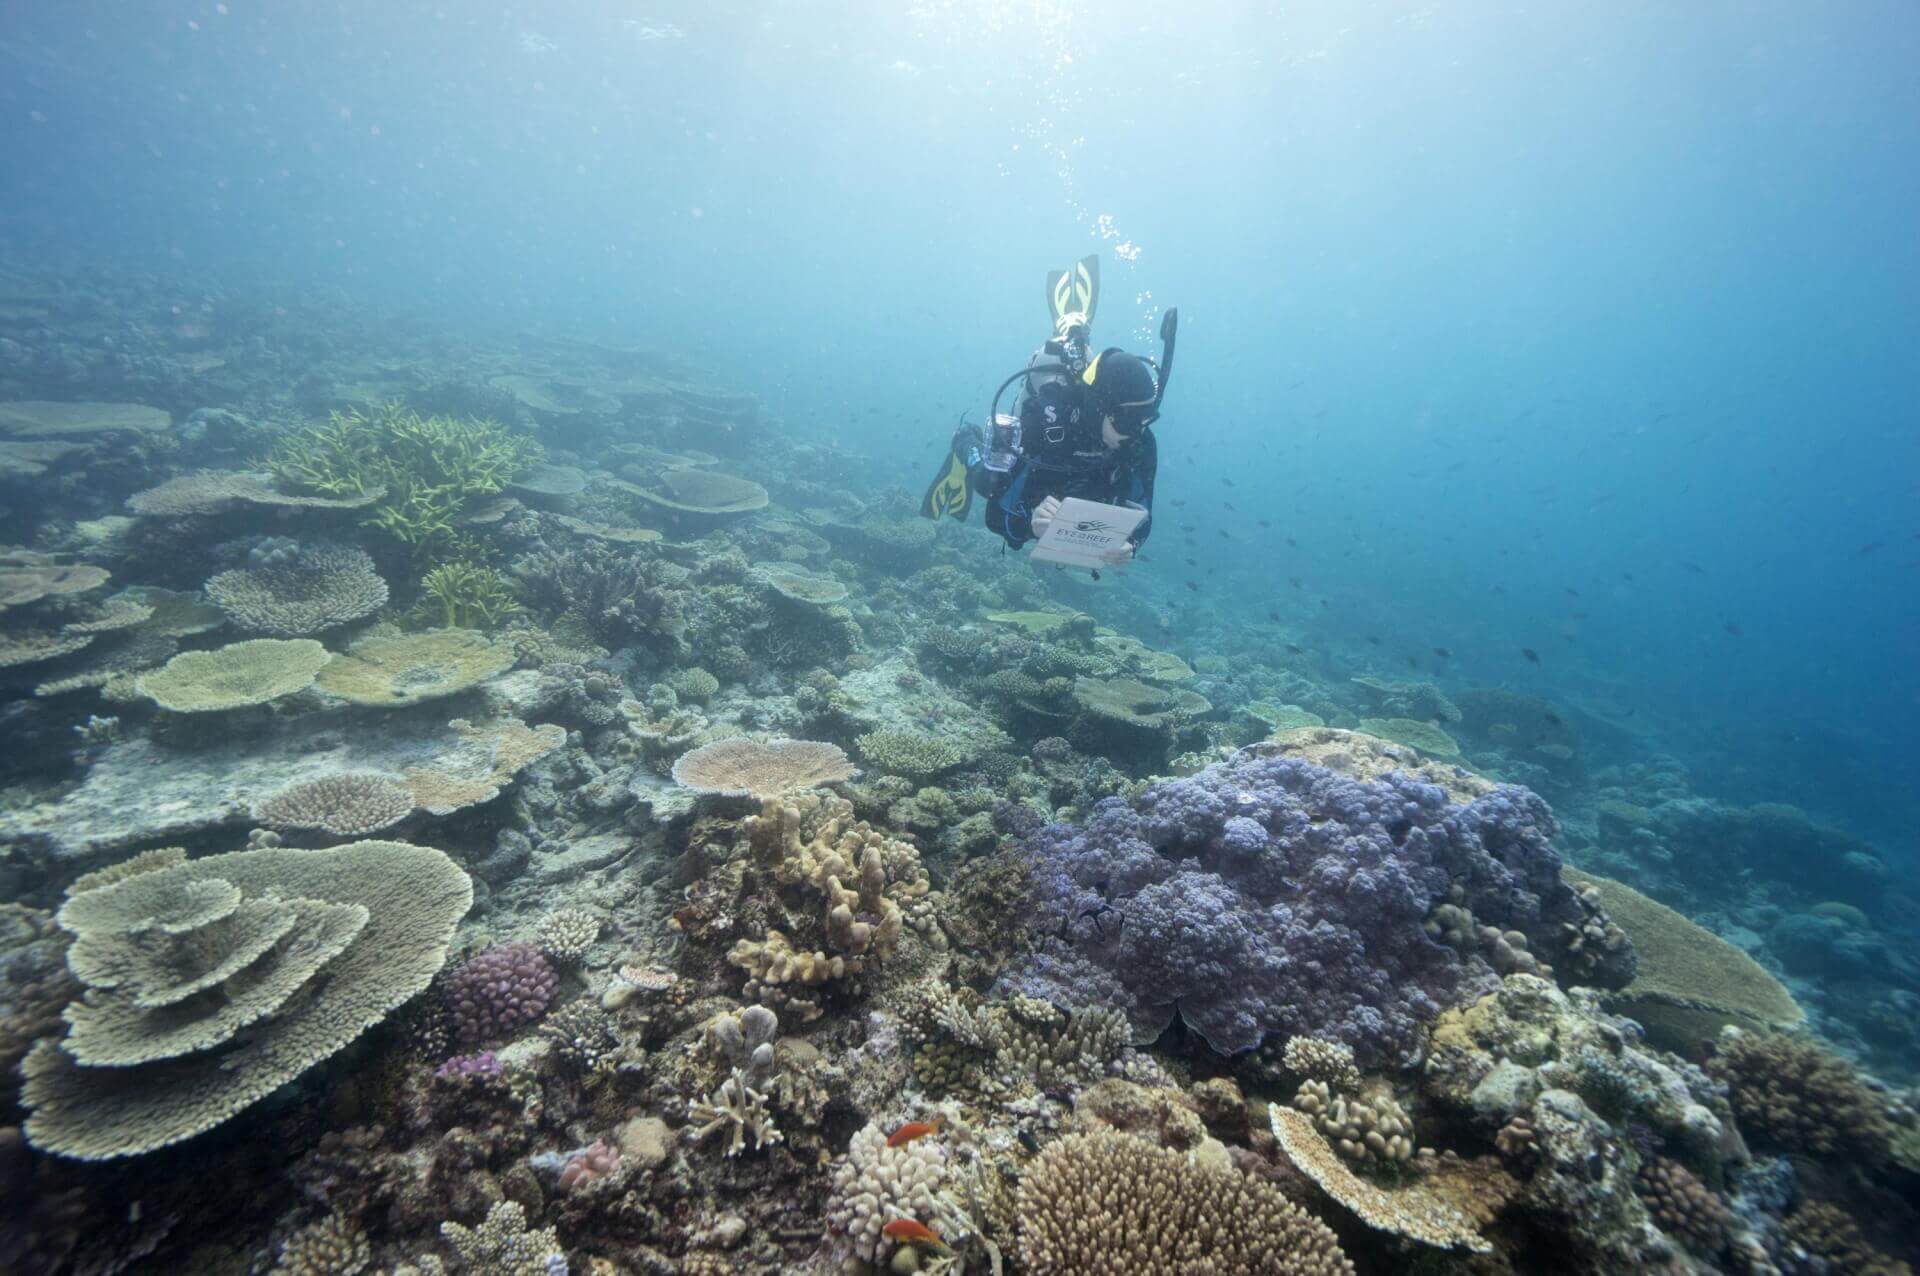 UNESCO Defers Vote on Great Barrier Reef After Intense Lobbying by Australia